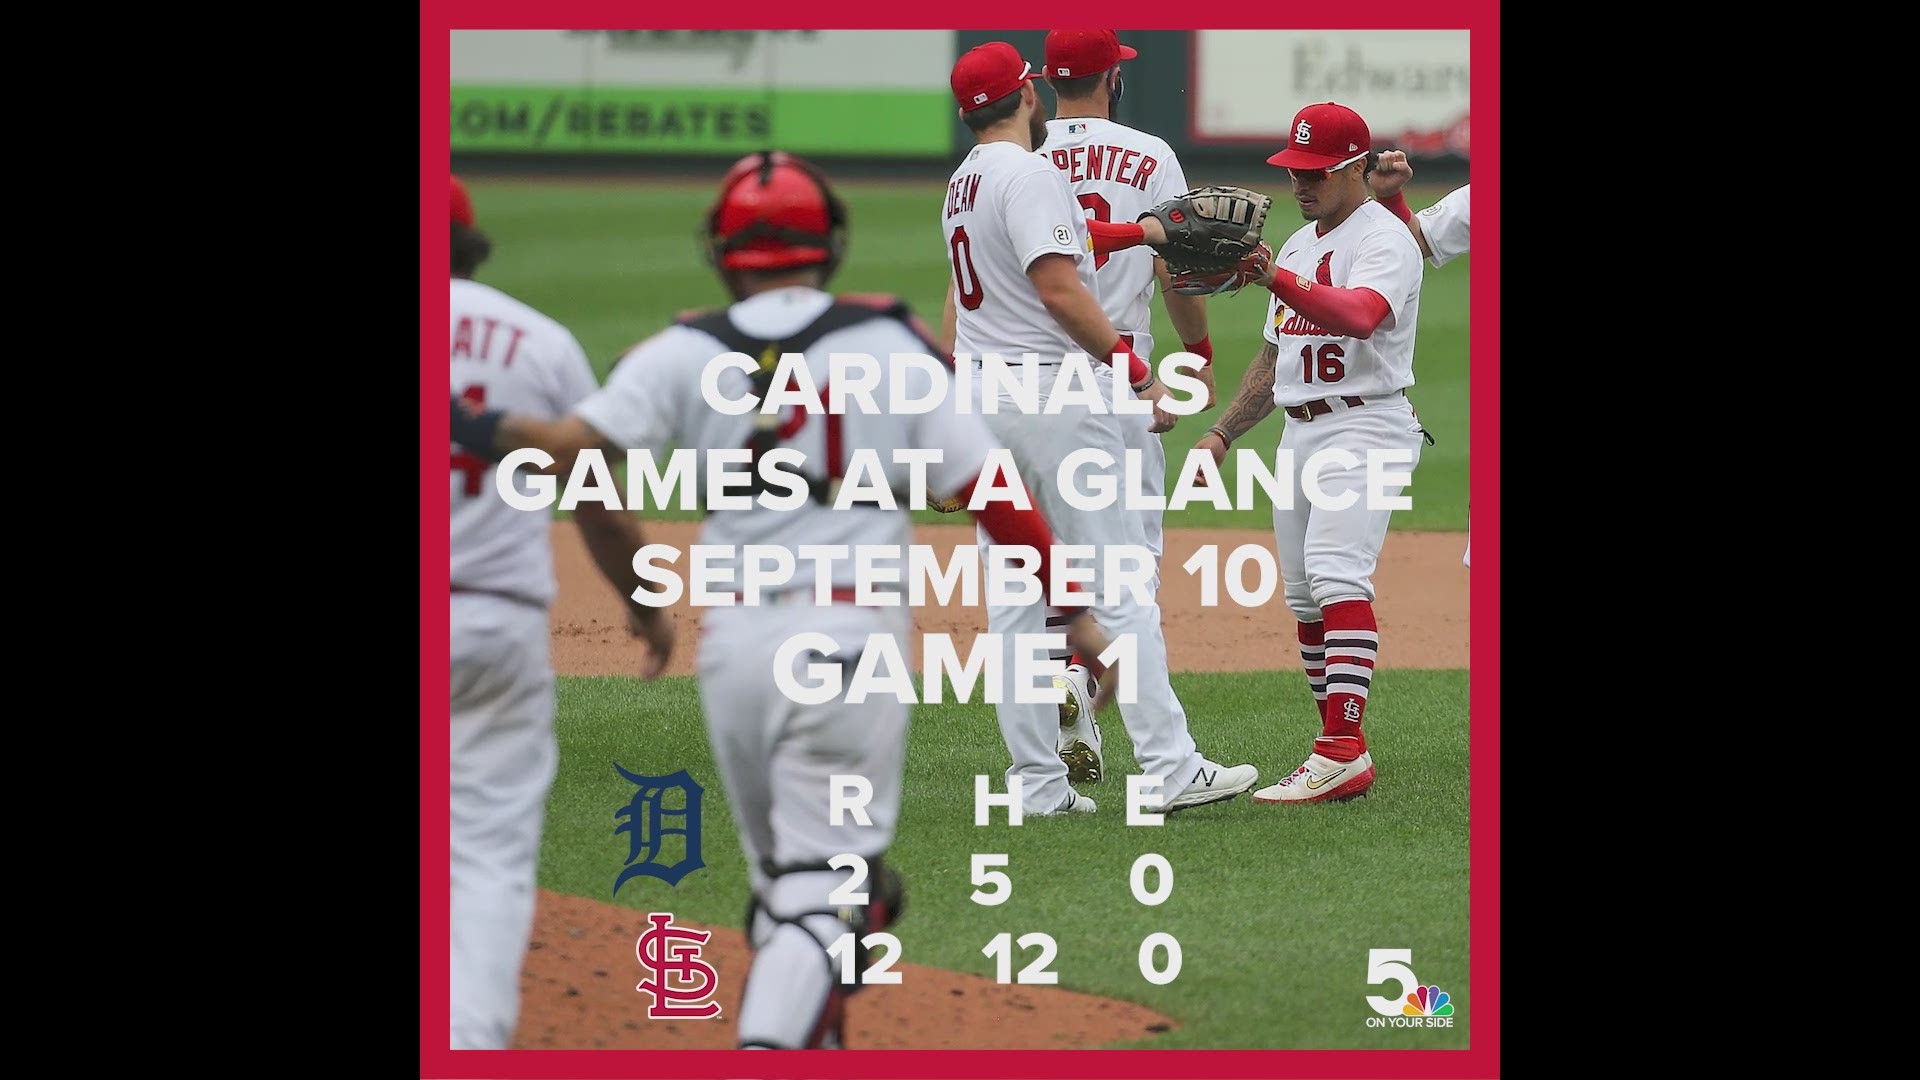 The Cardinals couldn't cap off the doubleheader sweep after blowing a late lead in Game 2.